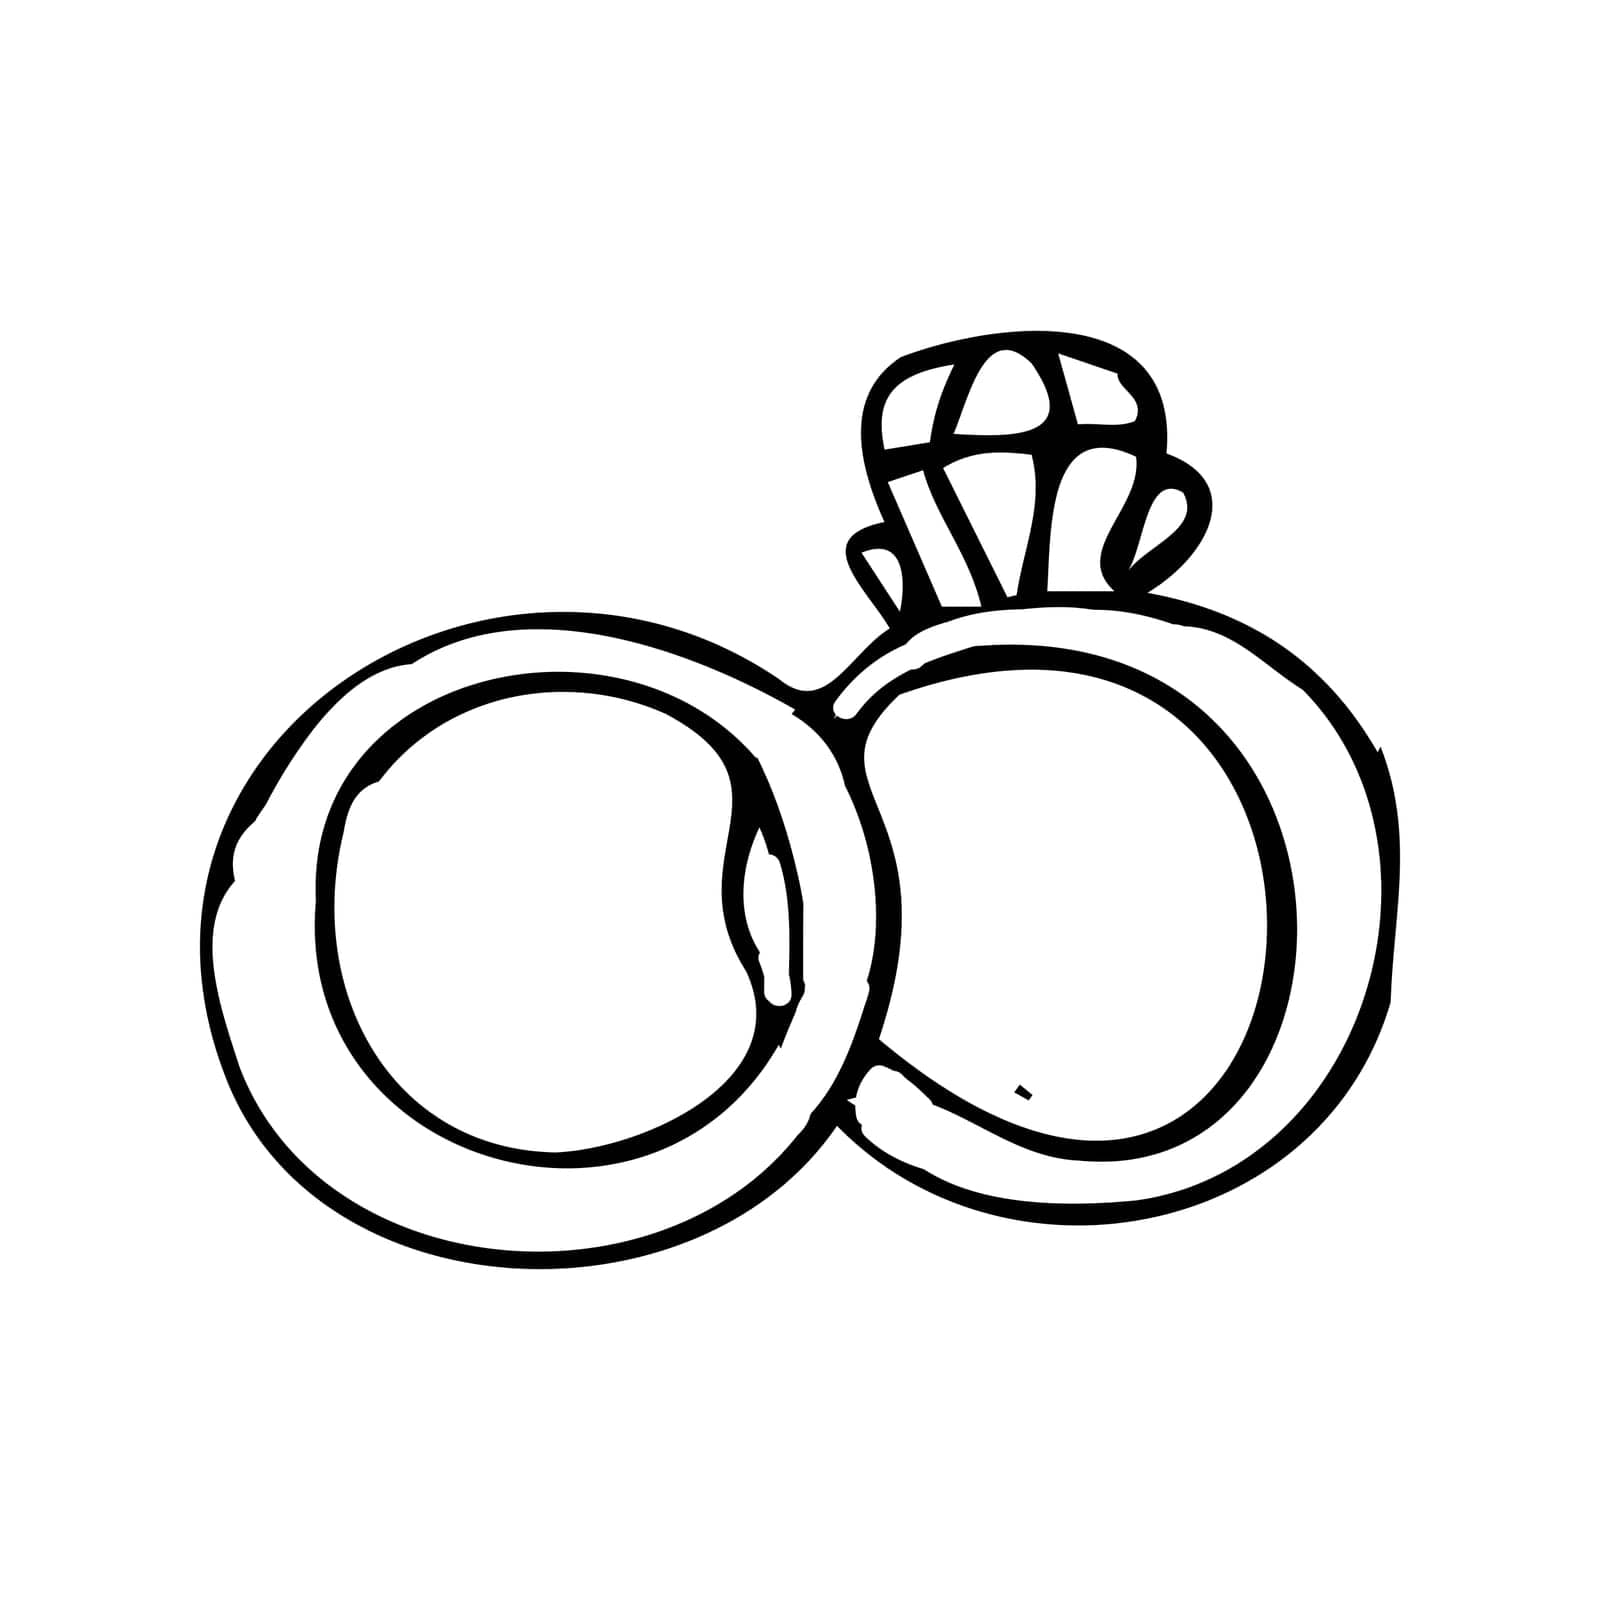 hand drawn sketch of wedding rings for pair. Vector illustration isolated. Doodle drawing icon can used for invitation design, greeting card, celebration banner.